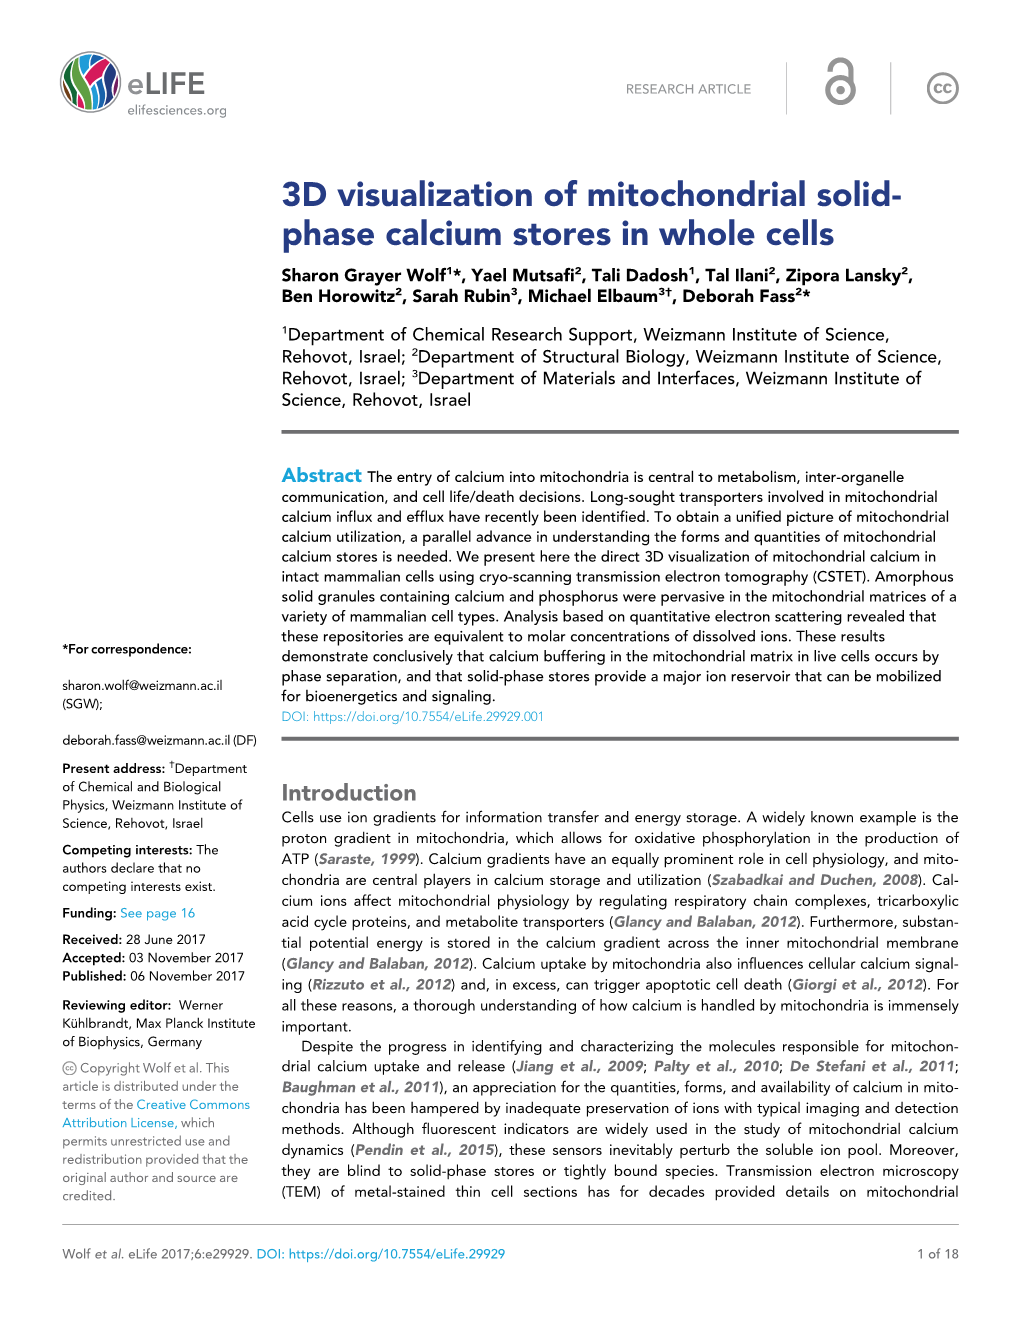 3D Visualization of Mitochondrial Solid- Phase Calcium Stores